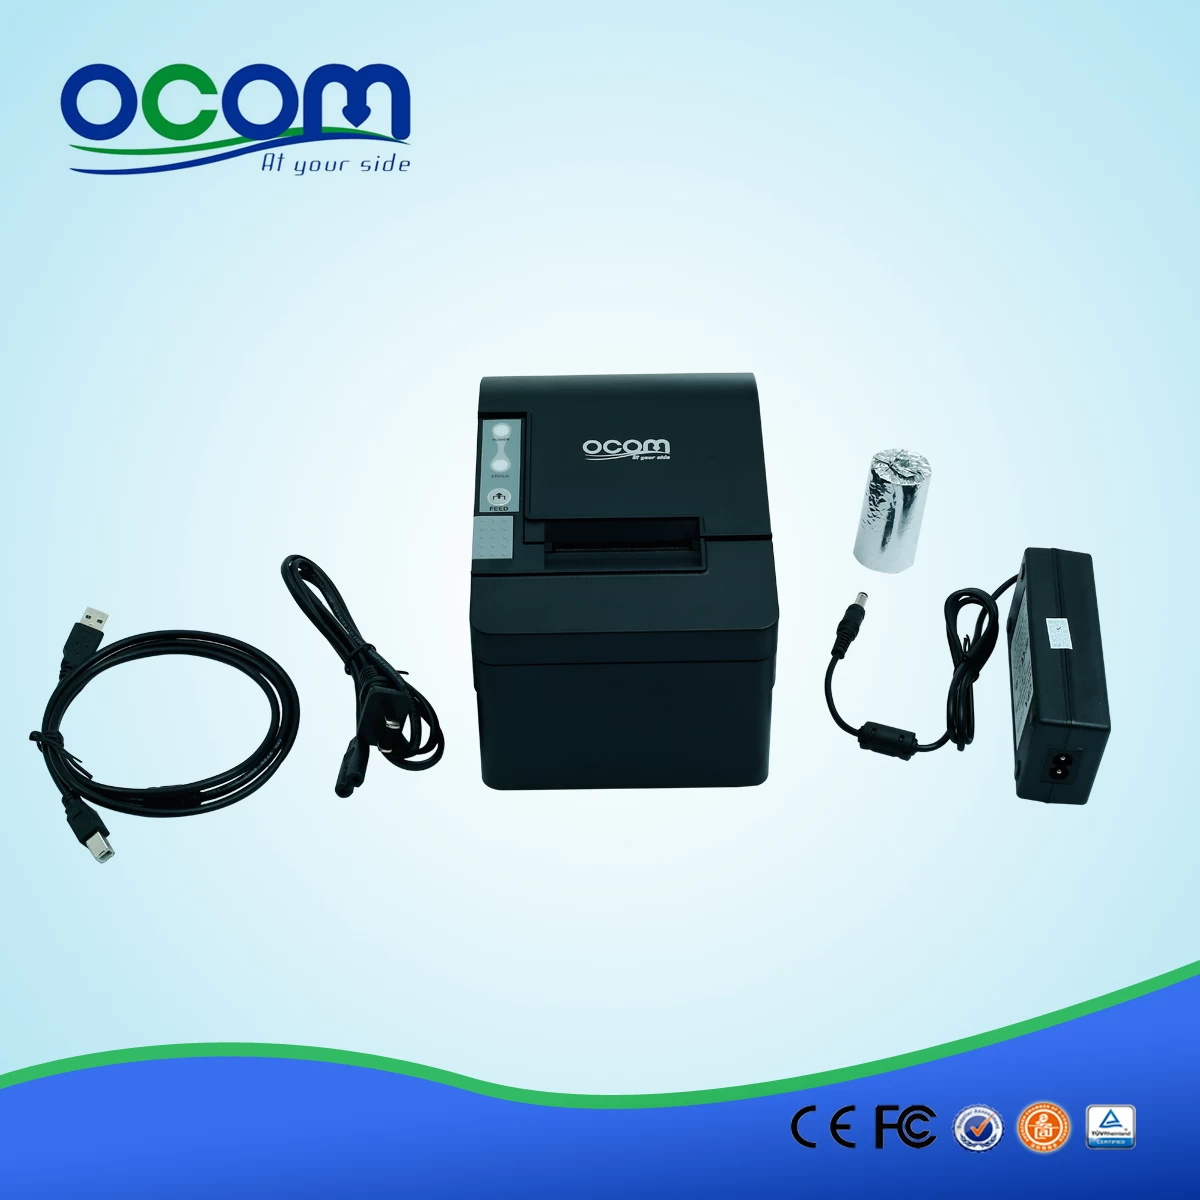 OCPP-58C 58mm USB Thermal Receipt Printer With Driver